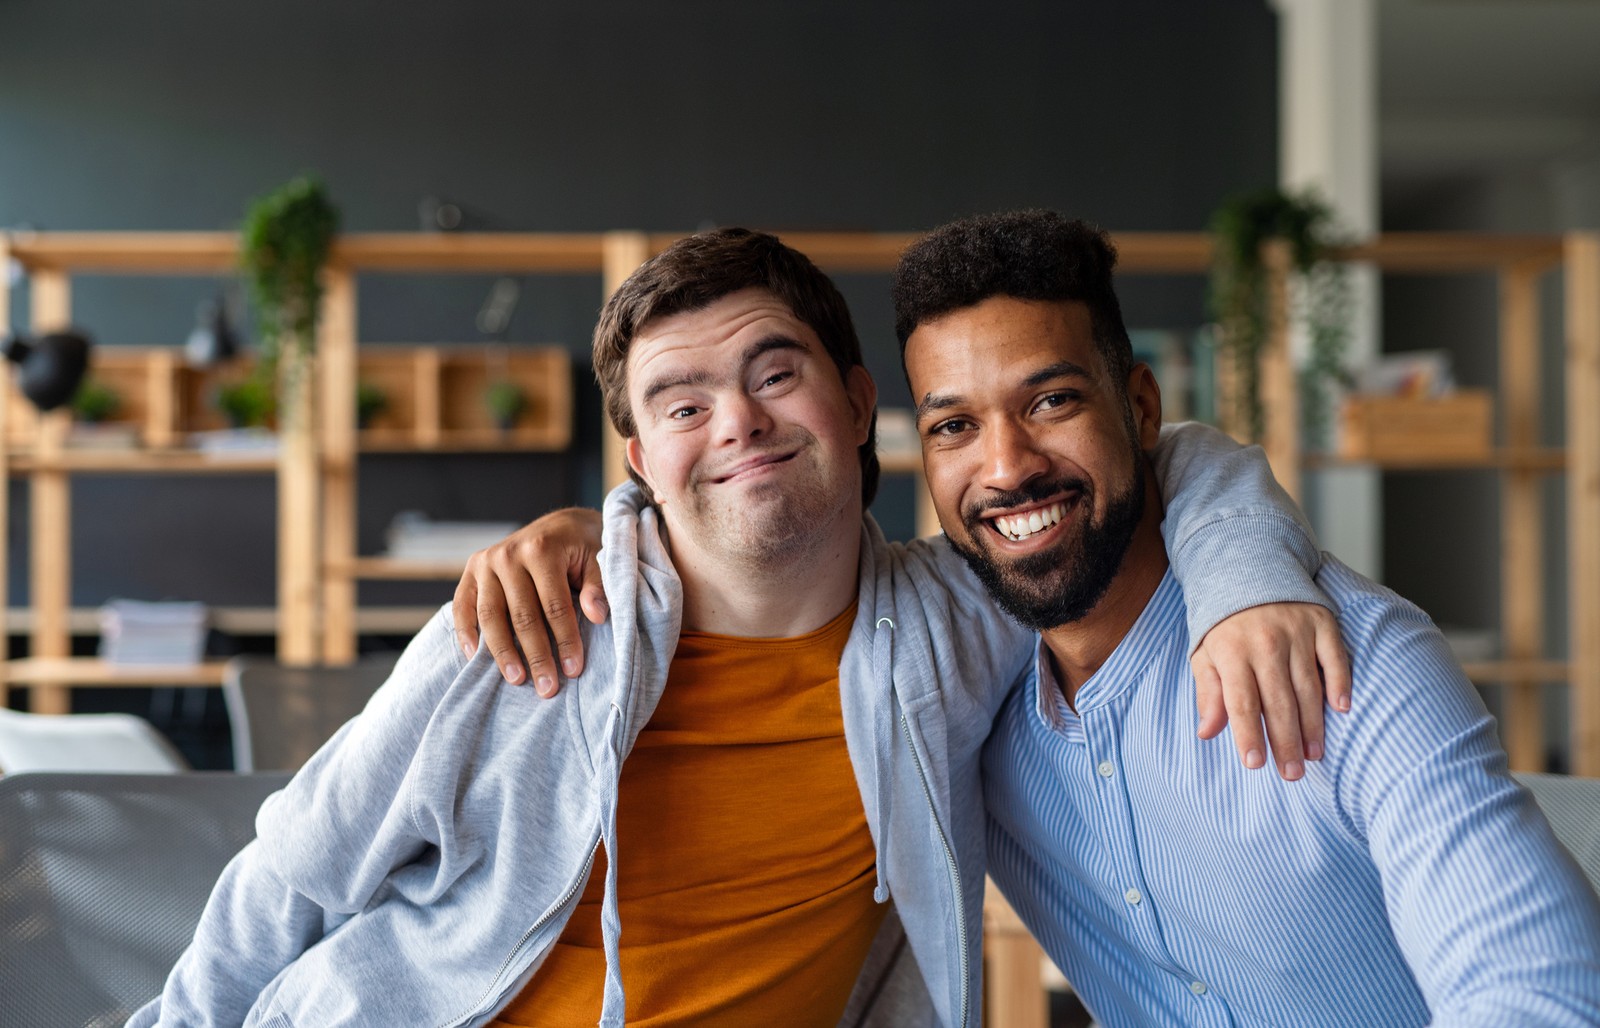 Man with disability and another man hugging and smiling.